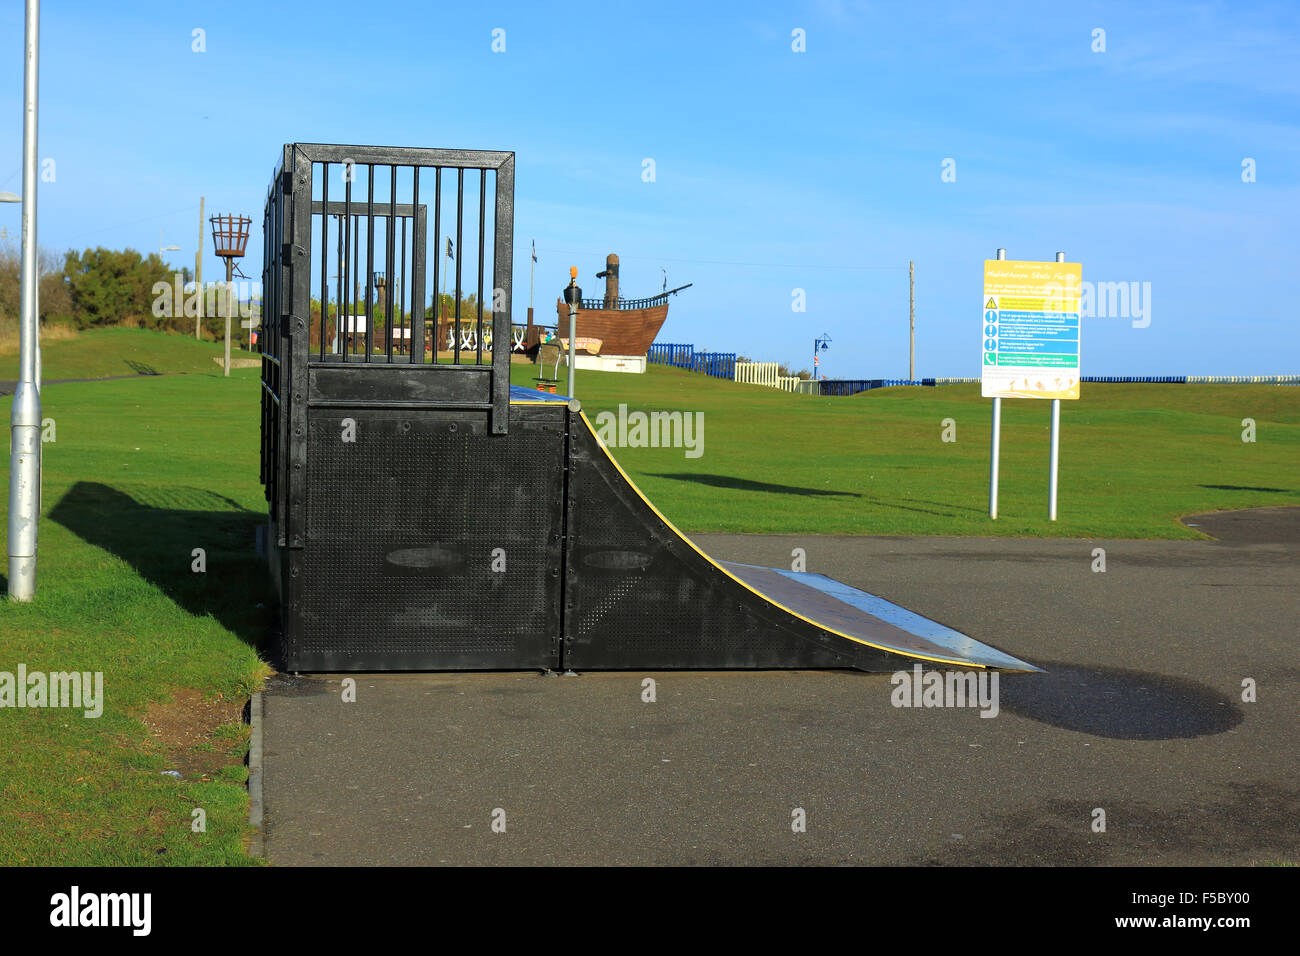 Skateboard ramps in Maplethorpe with a play area pirate ship in the background Stock Photo